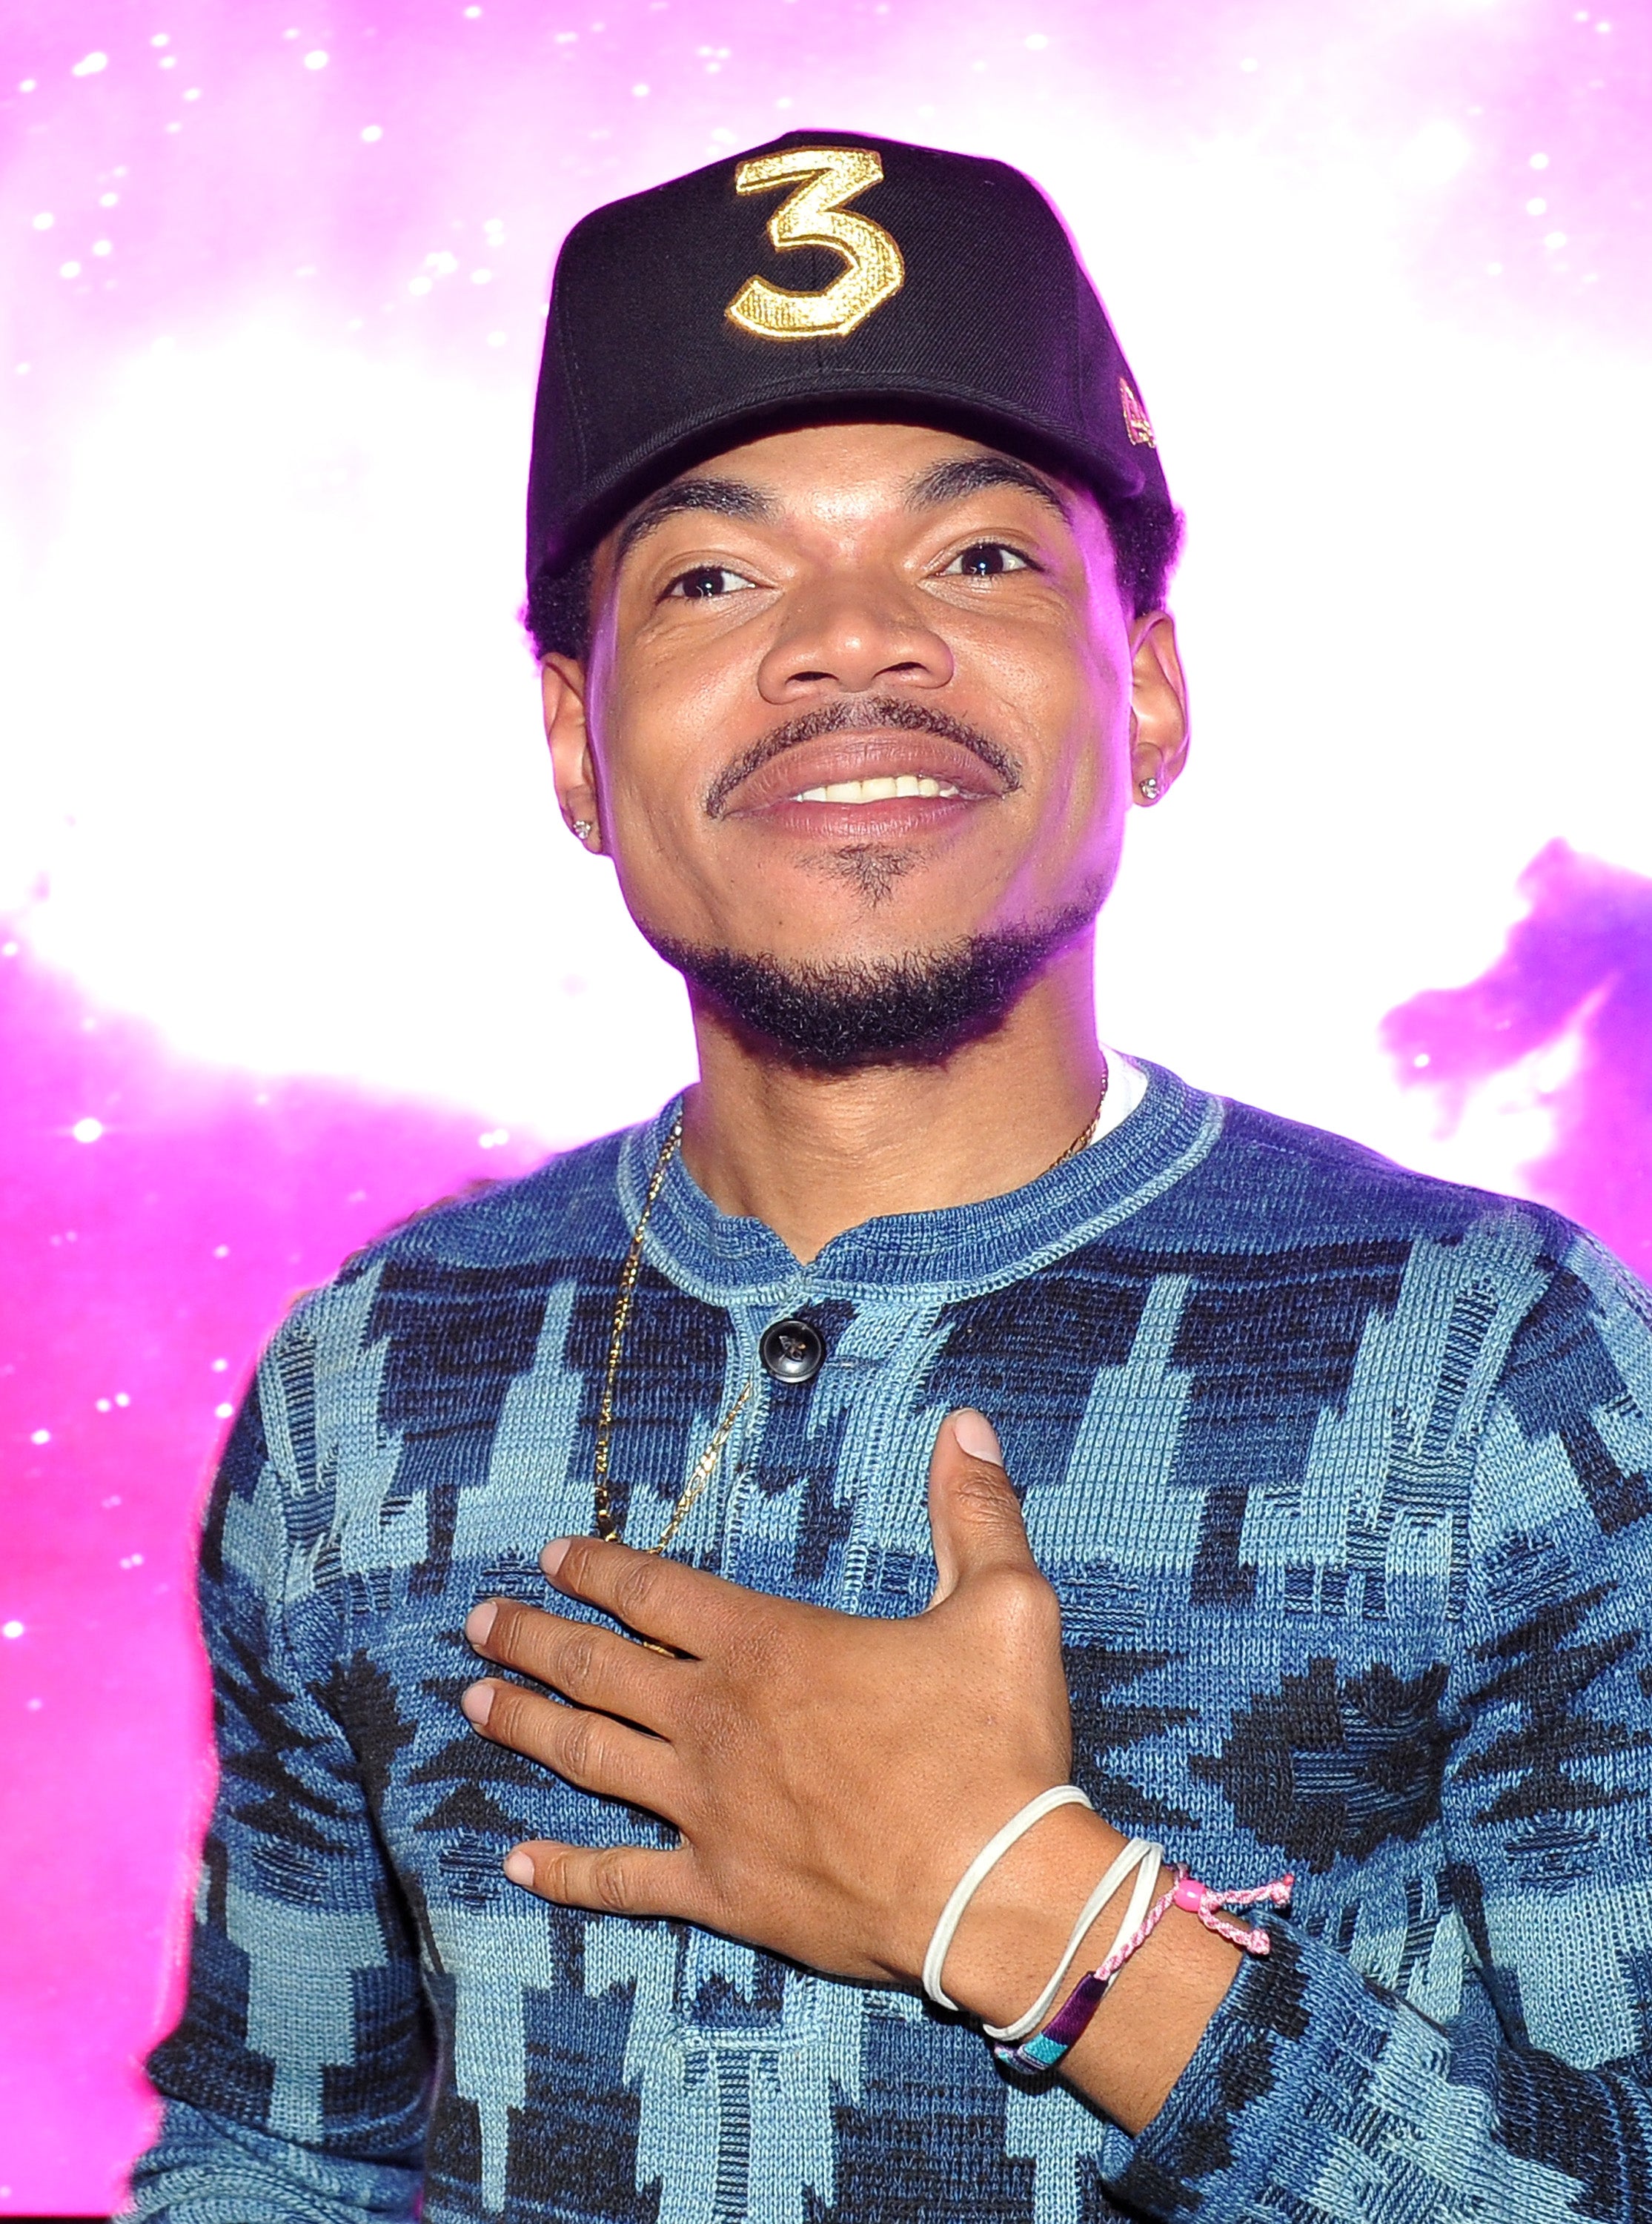 Chicago Public School Students Write Open Letter Thanking Chance The Rapper
 
